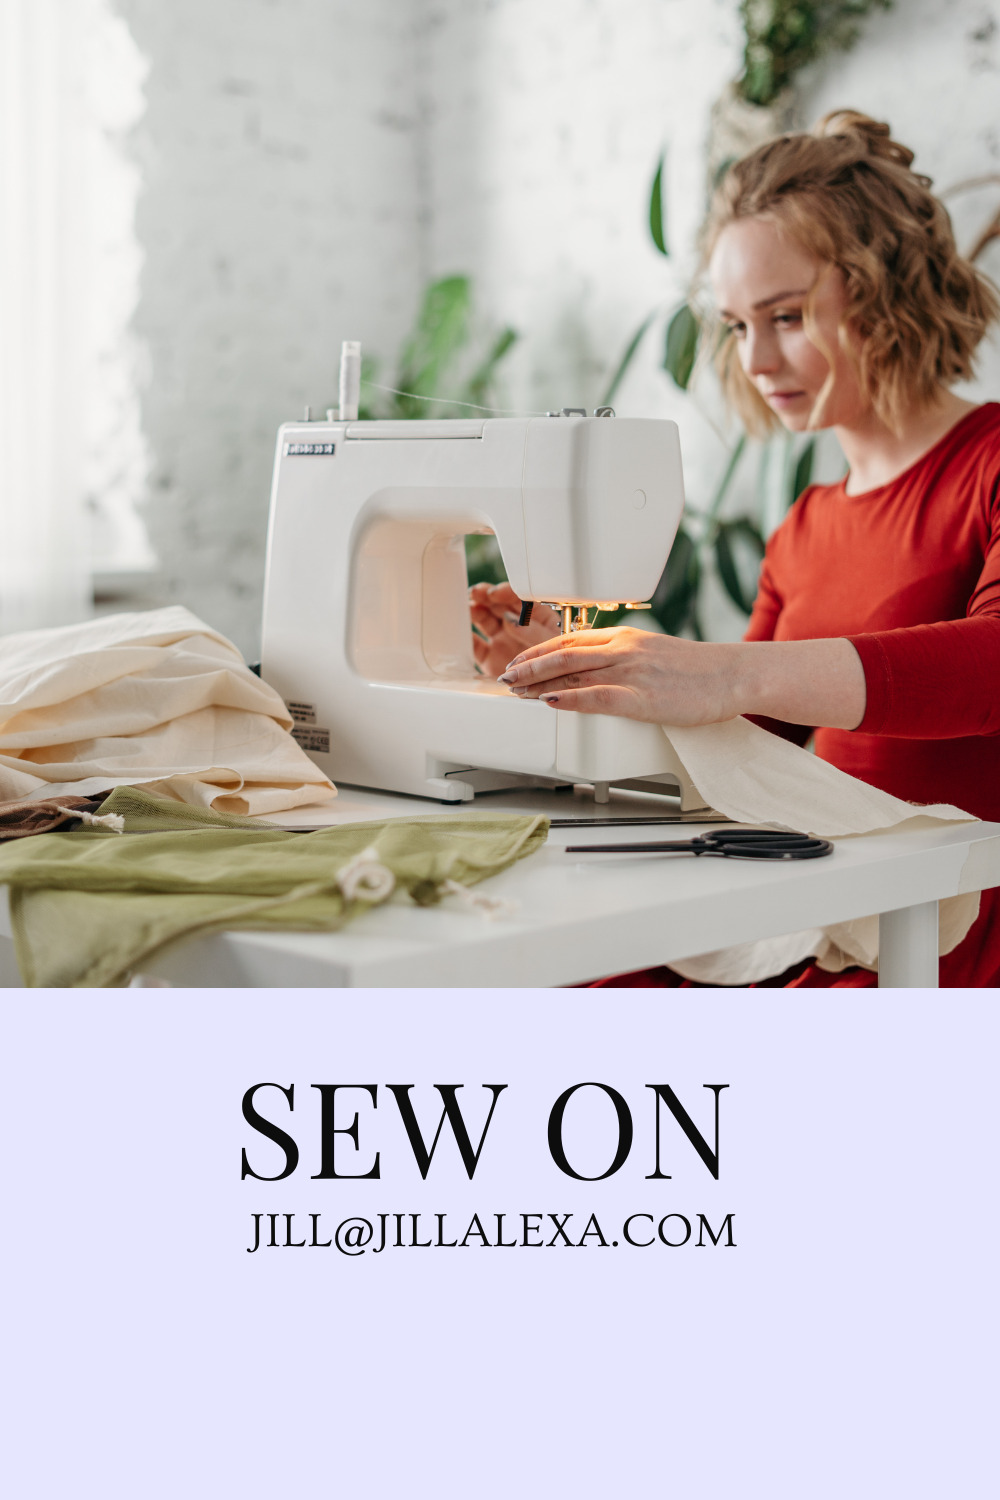 AND SEW ON | SEW ON